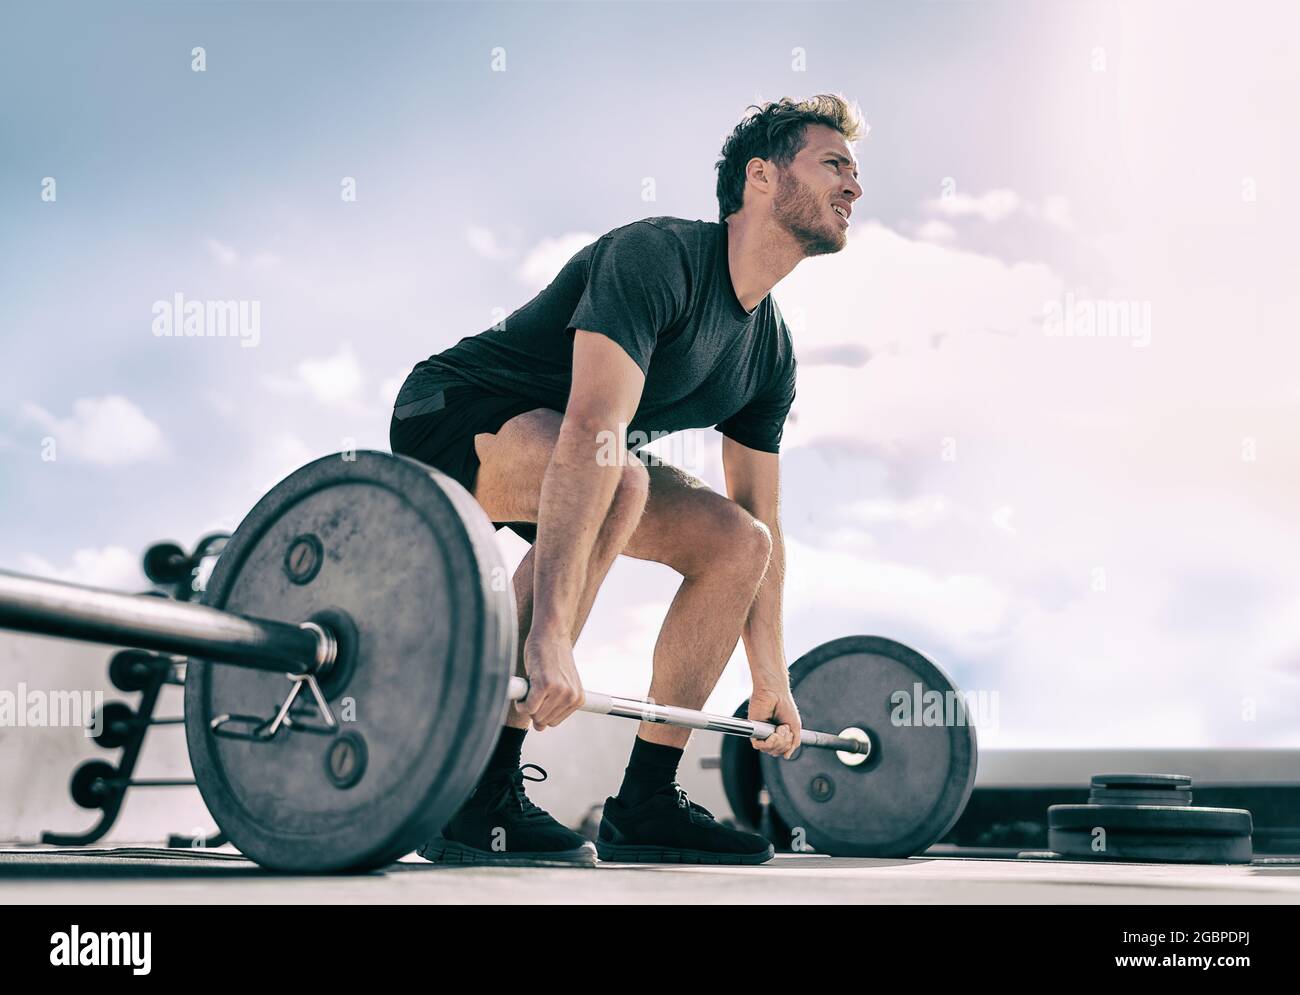 Gym fitness weightlifting deadlift man bodybuilding powerlifting at outdoor summer health club. Bodybuilder doing barbell weight lifting training Stock Photo